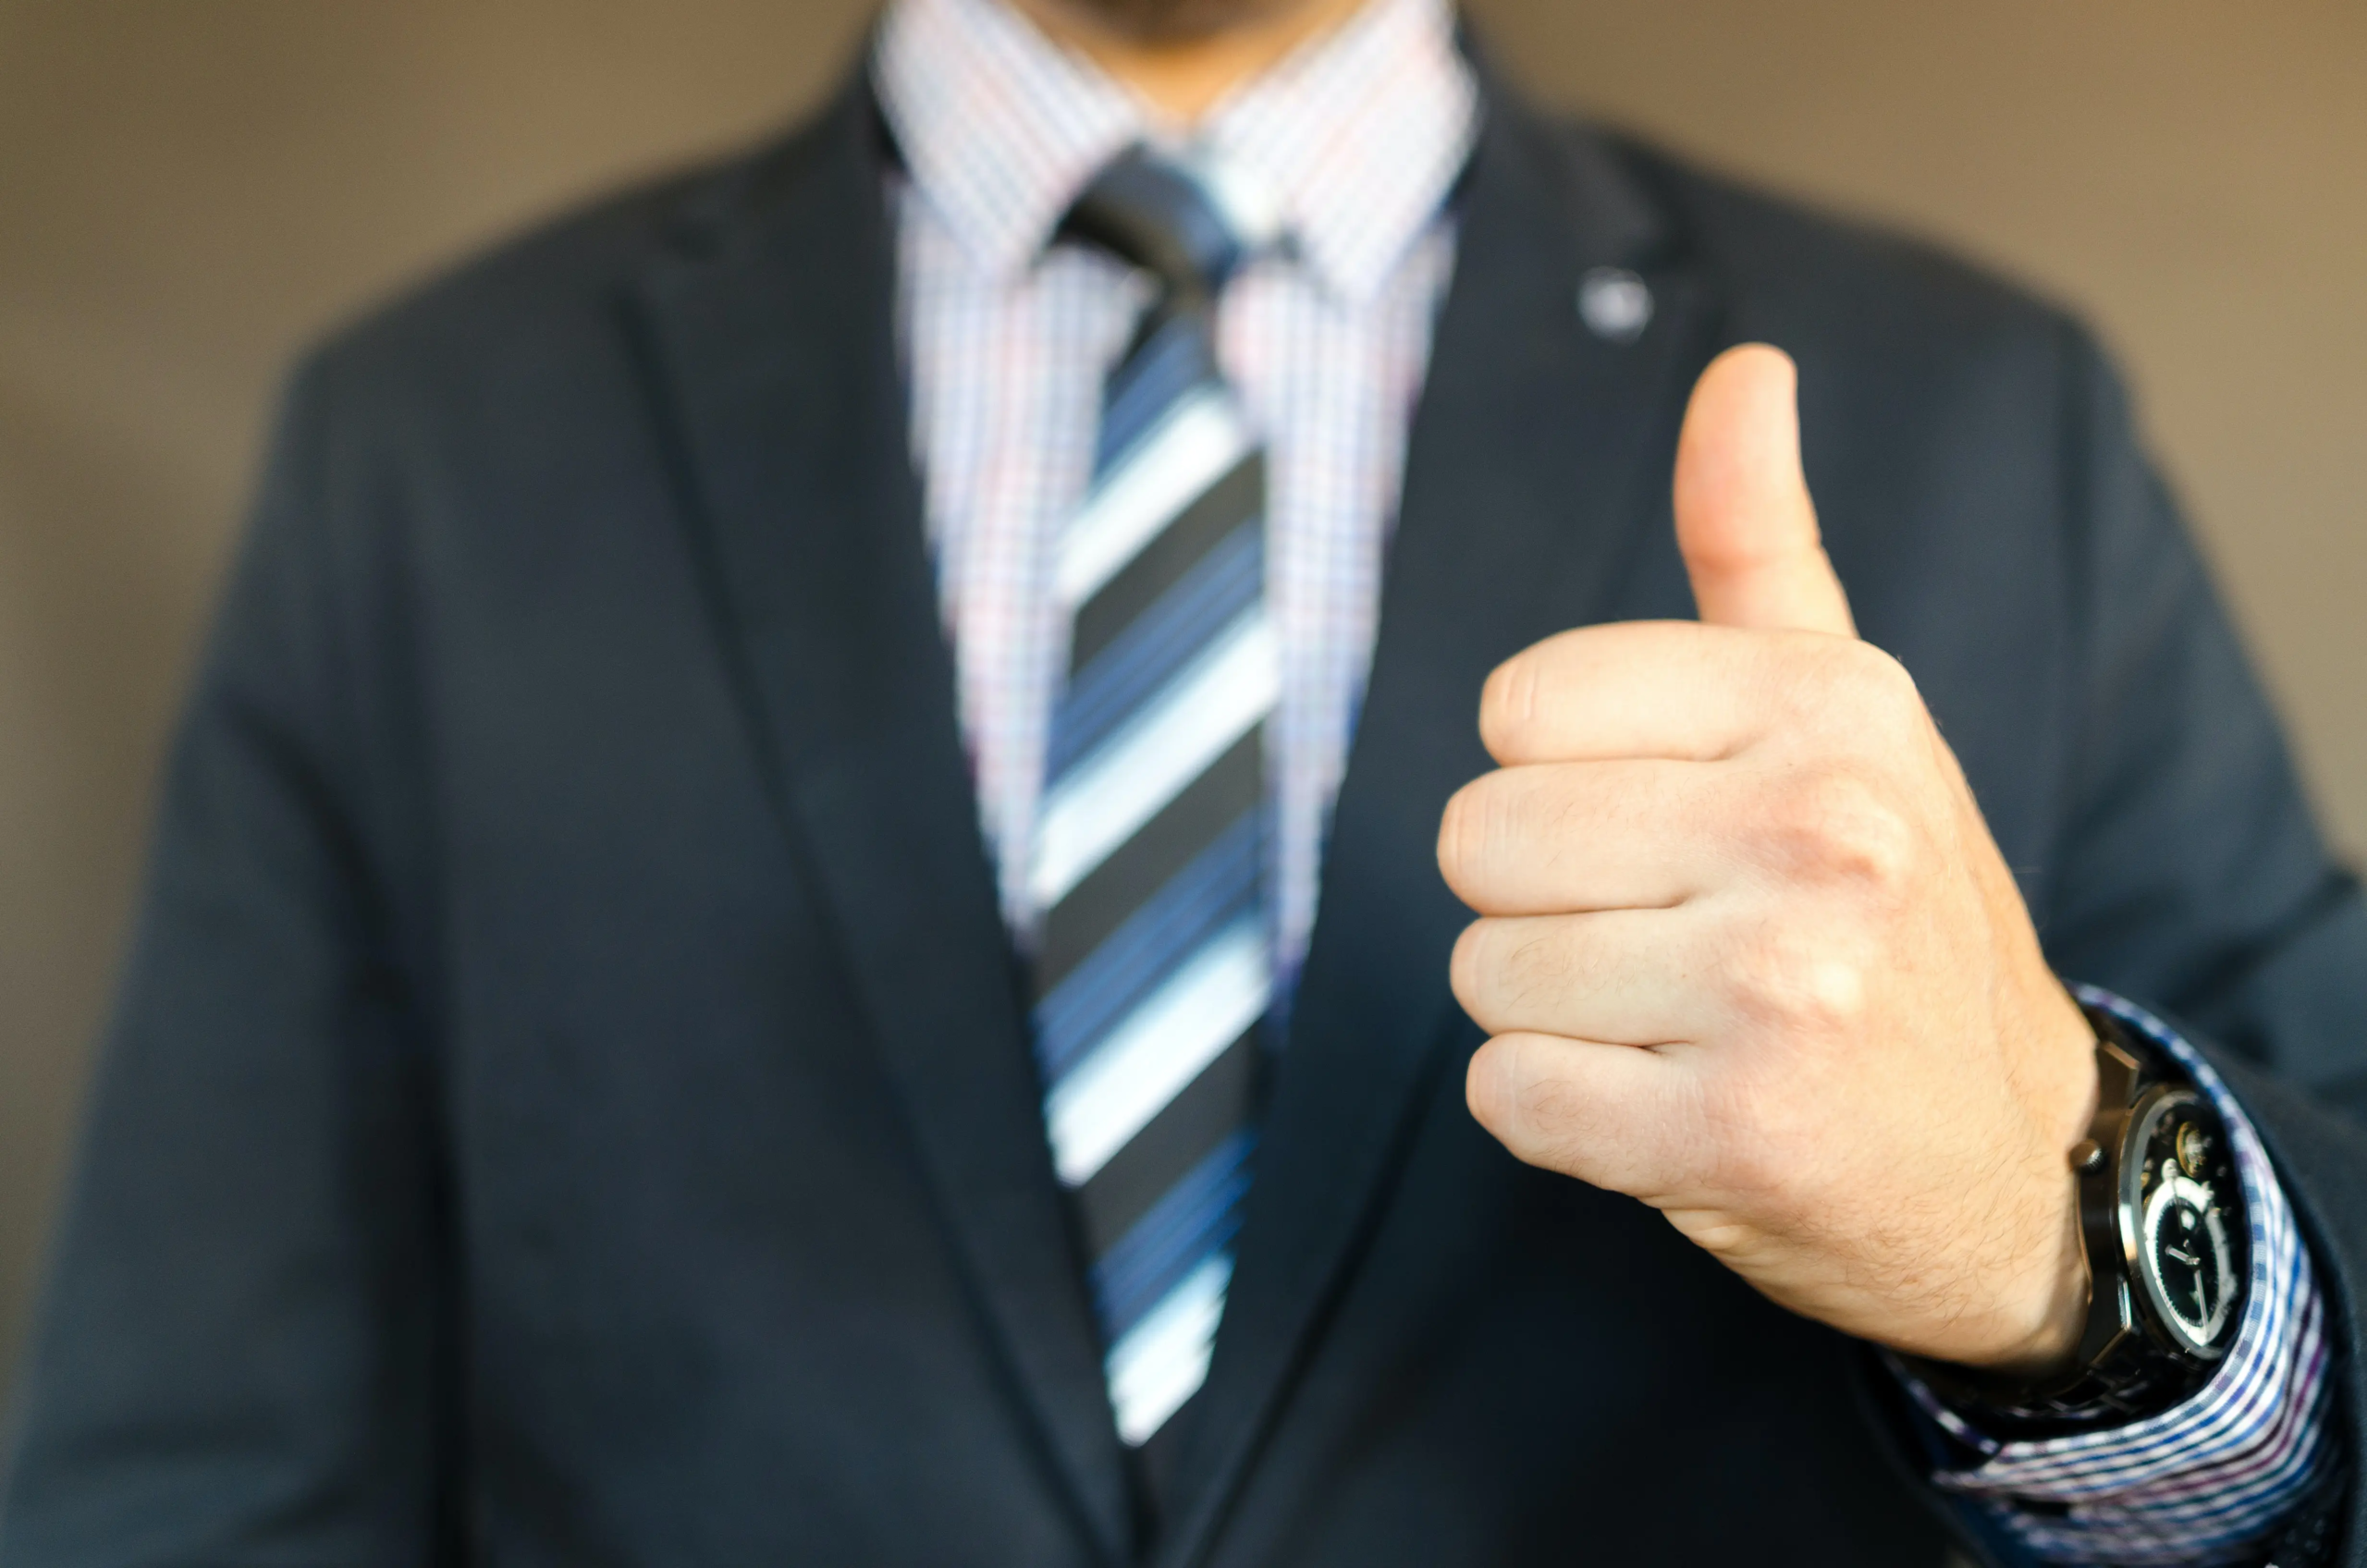 A man in a suit and tie giving the thumbs up.